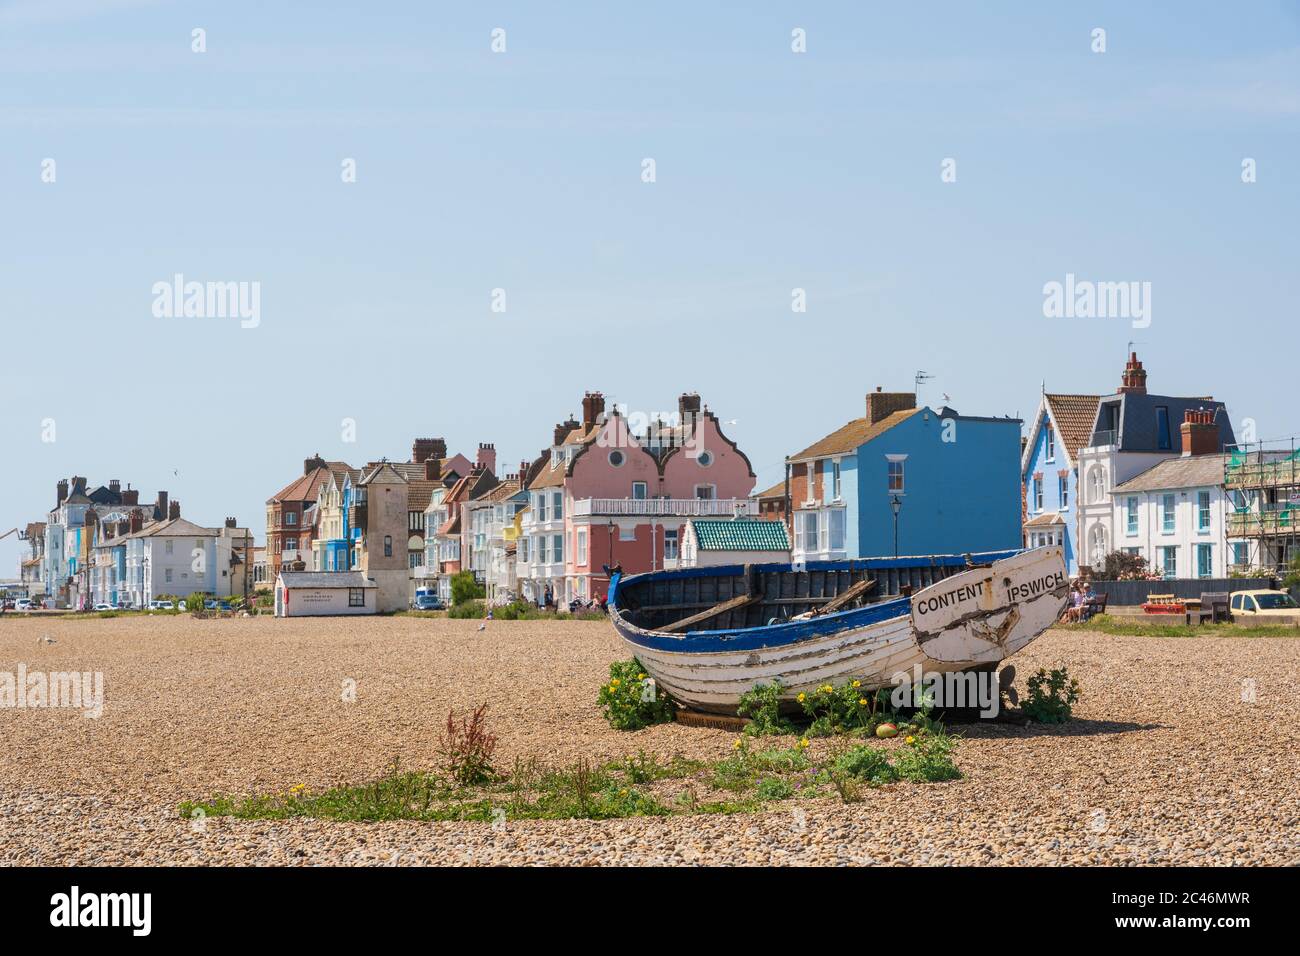 Abandoned fishing boat on beach with pastel coloured buildings in the background on a sunny day with blue sky. Aldeburgh, Suffolk. UK Stock Photo